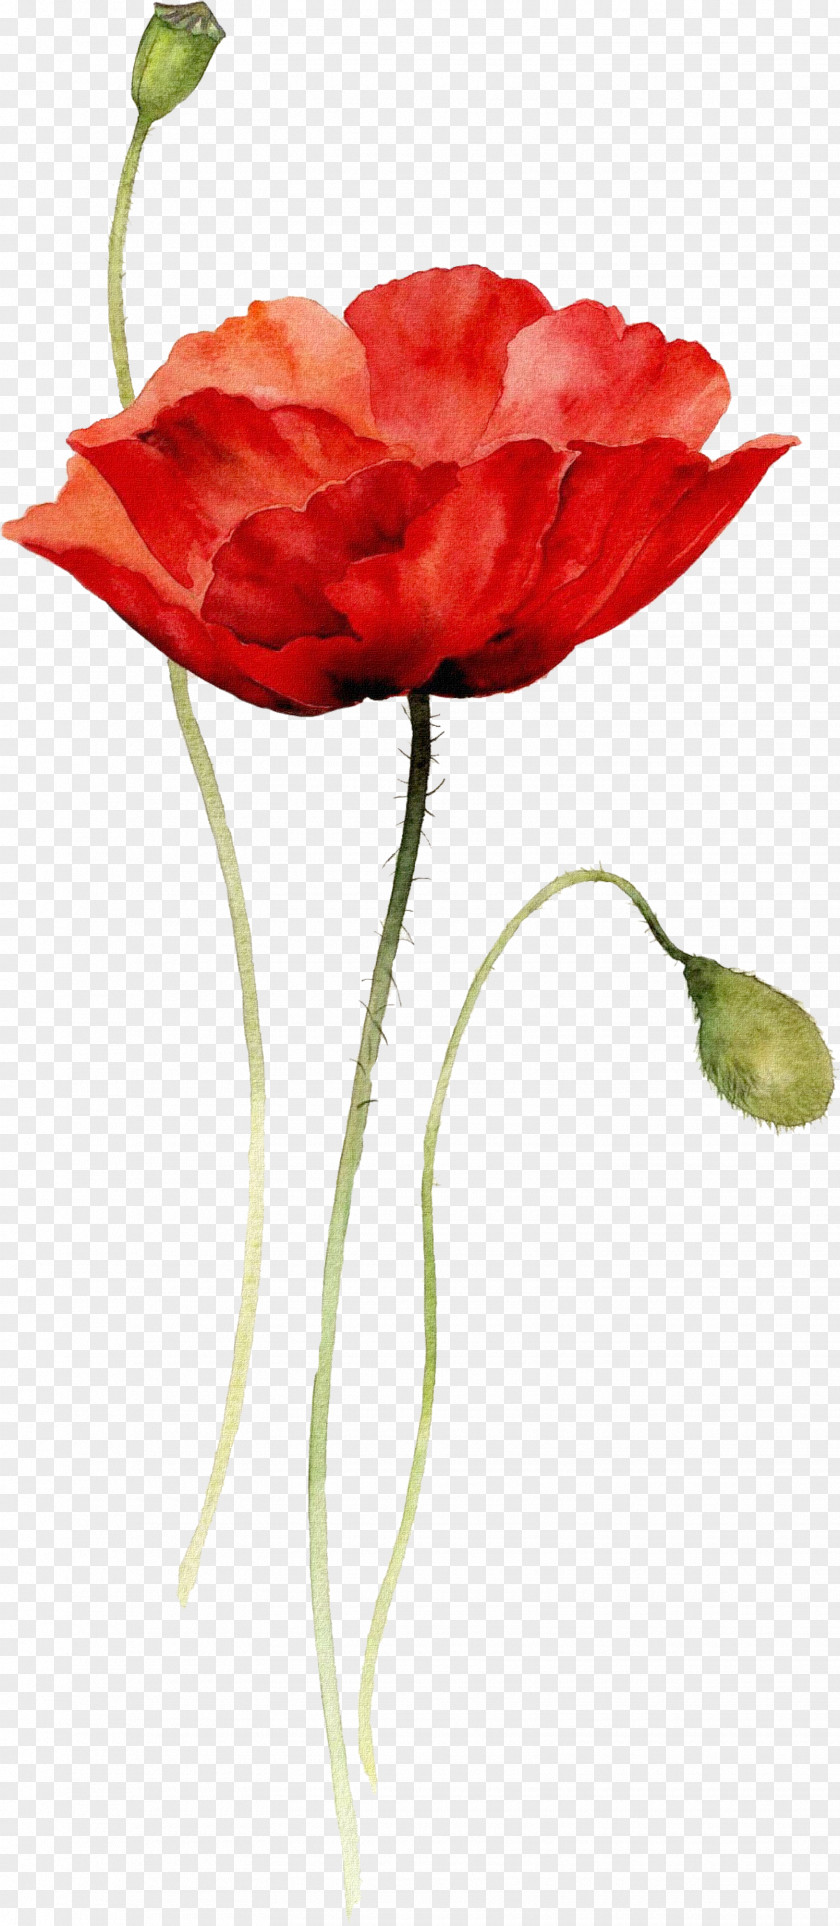 Cartoon Anzac Poppy Watercolor: Flowers Watercolor Painting Drawing PNG